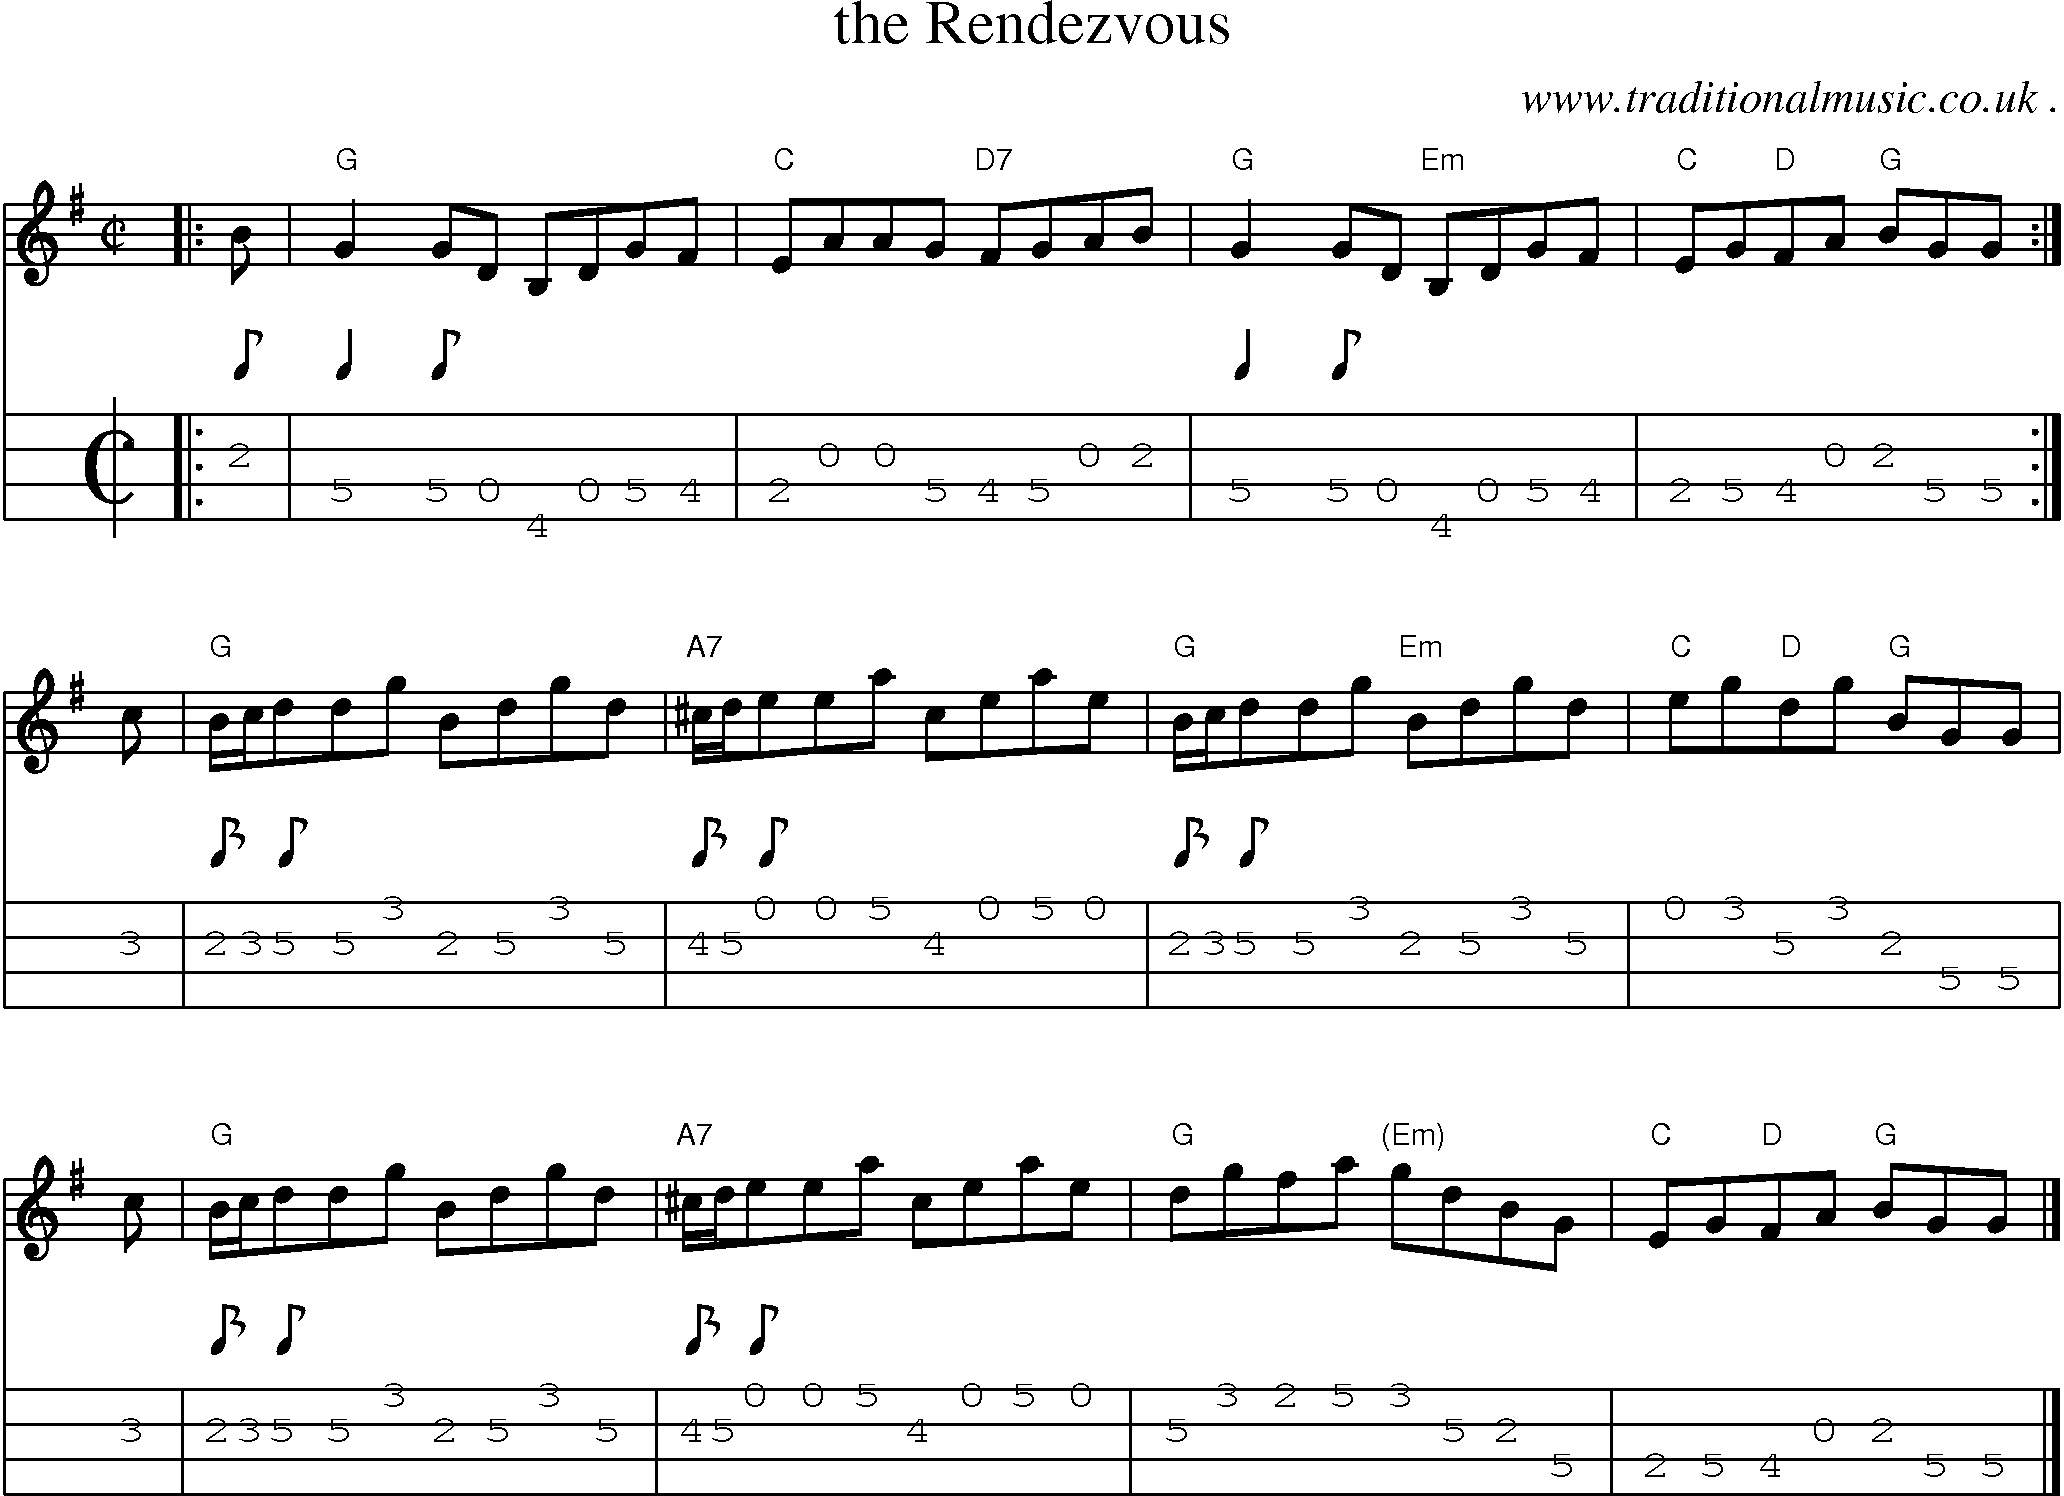 Sheet-music  score, Chords and Mandolin Tabs for The Rendezvous